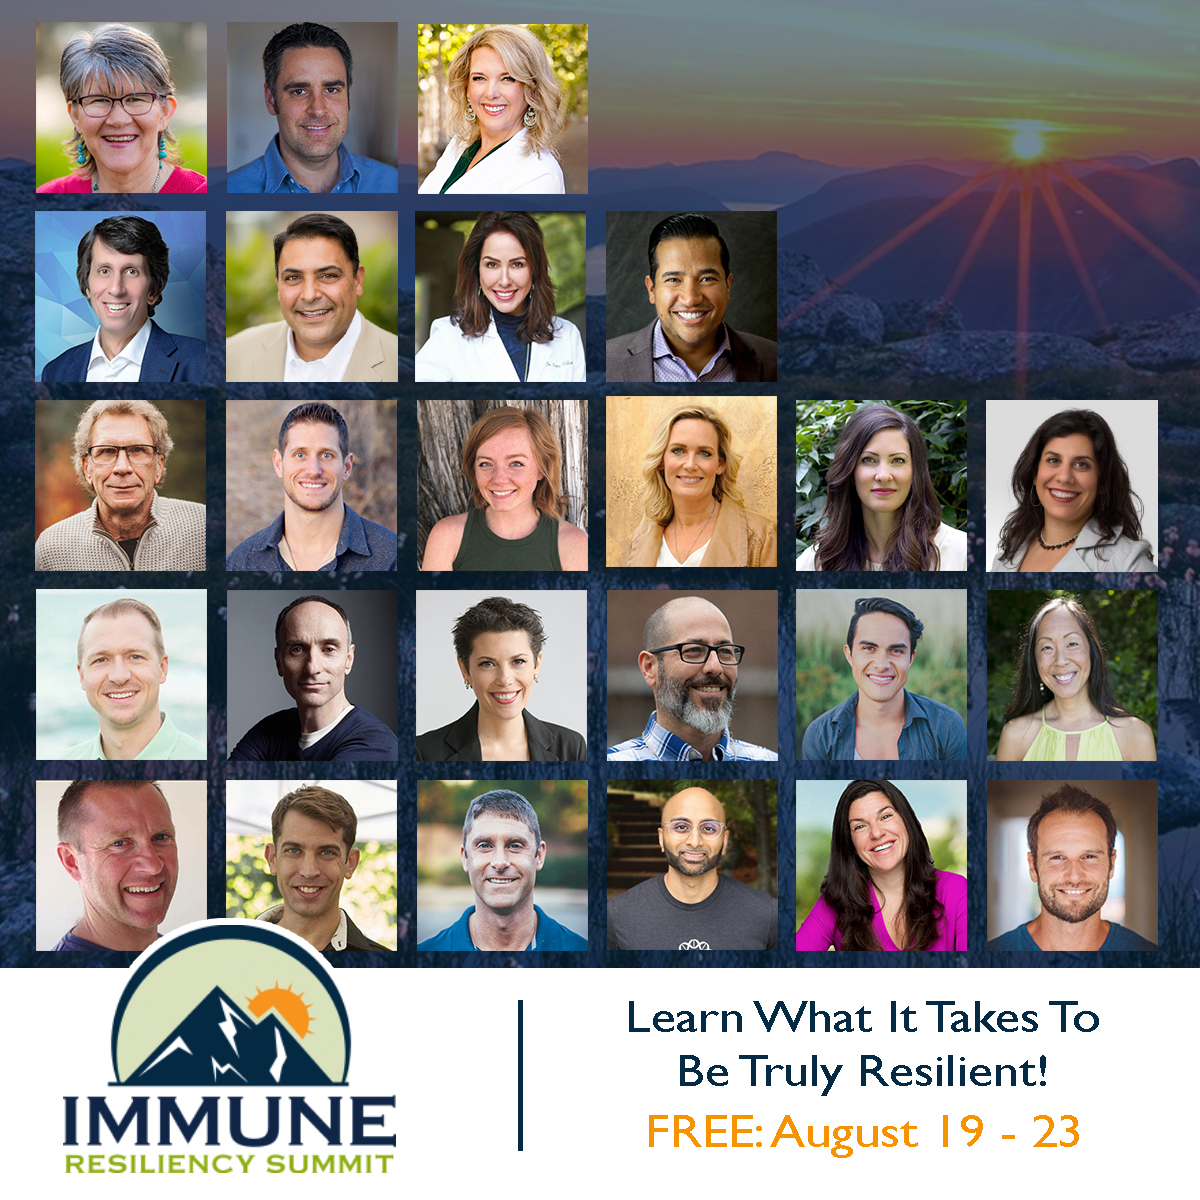 Immune Resiliency Summit – Own Your Future: Register for FREE